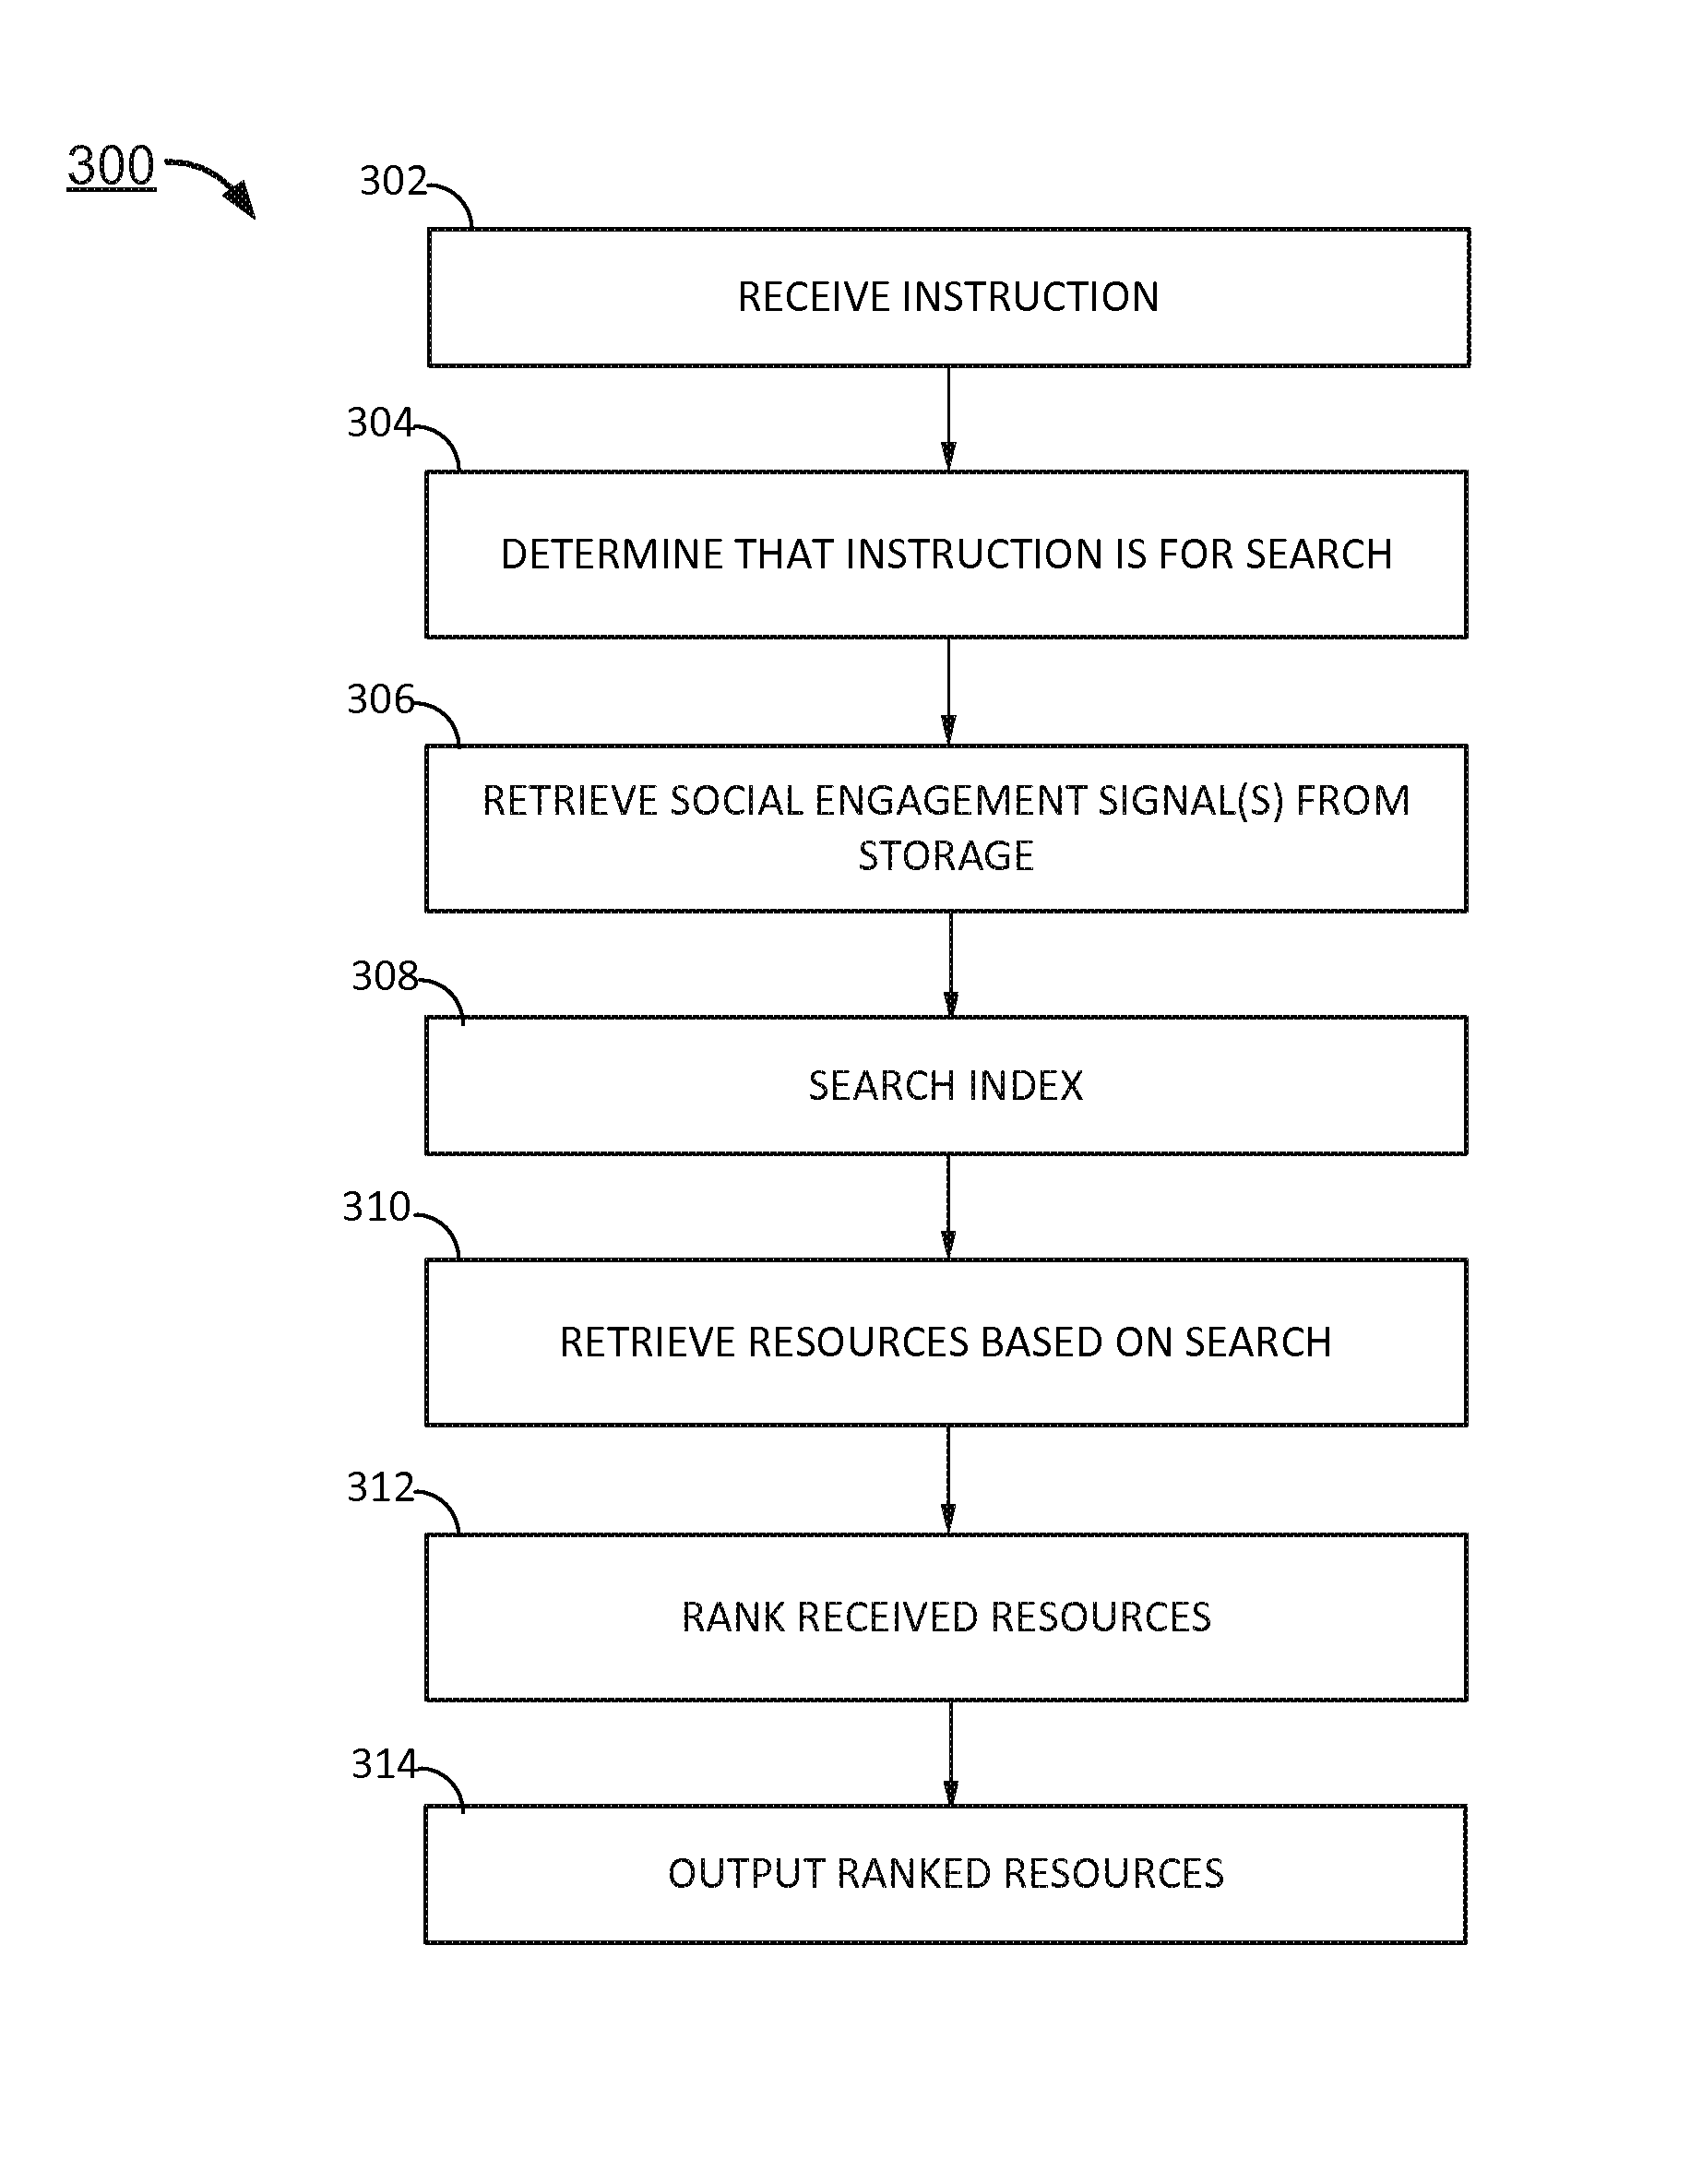 Determining content of interest based on social network interactions and information  - US-9904703-B1